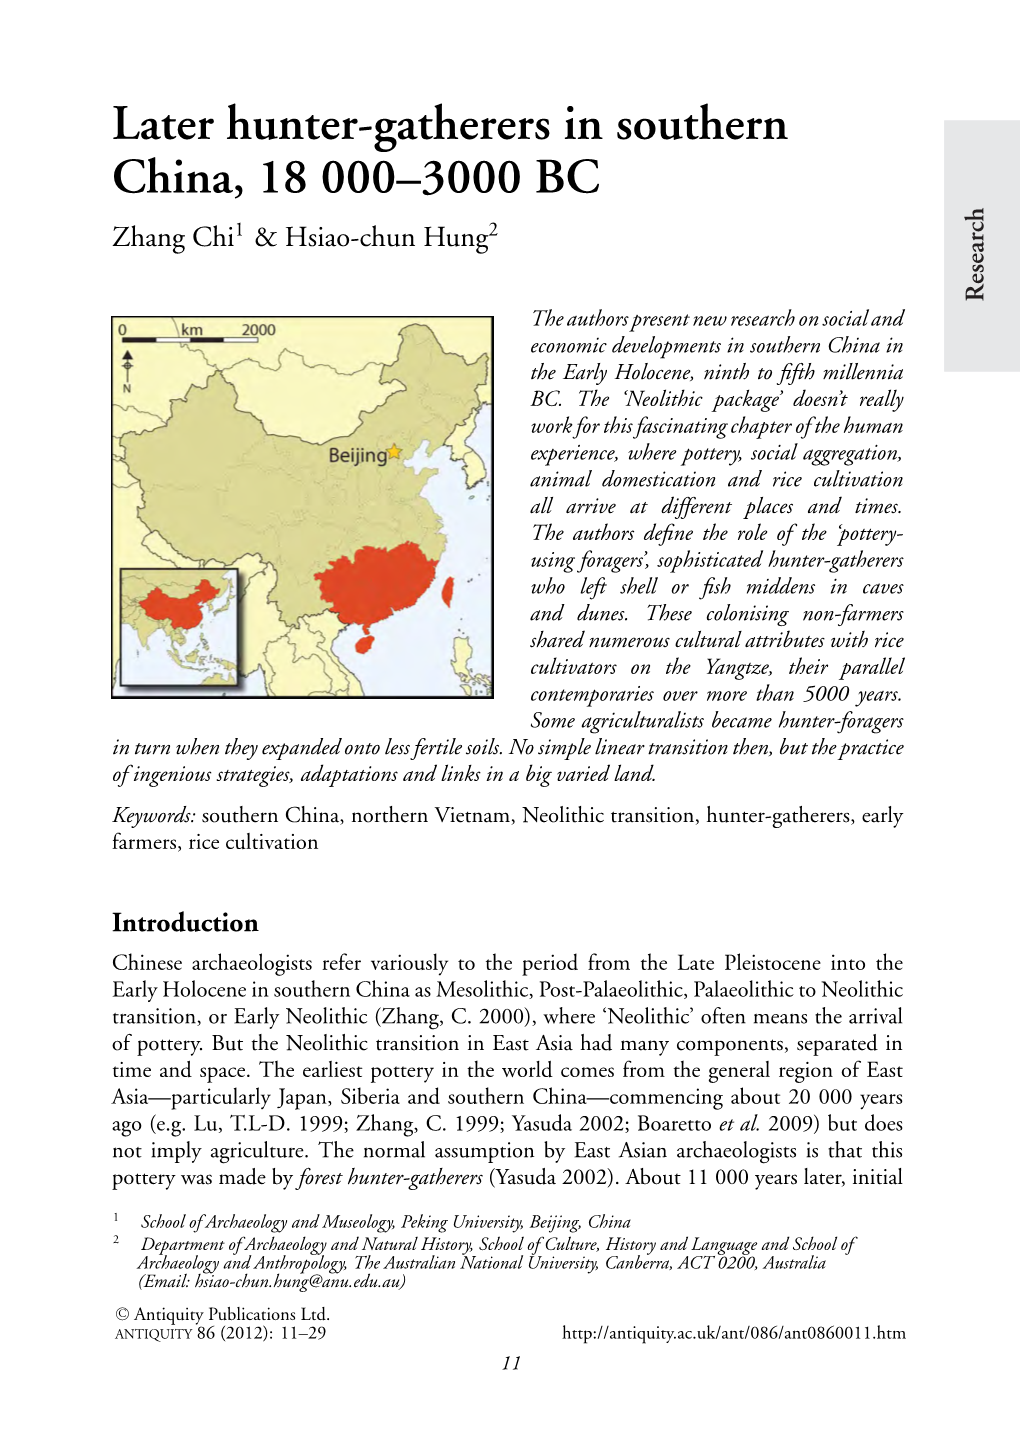 Later Hunter-Gatherers in Southern China, 18 000–3000 BC Pre-Domestication Rice Cultivation Began in the Region Between the Yellow and Huai Rivers (Zhang, C